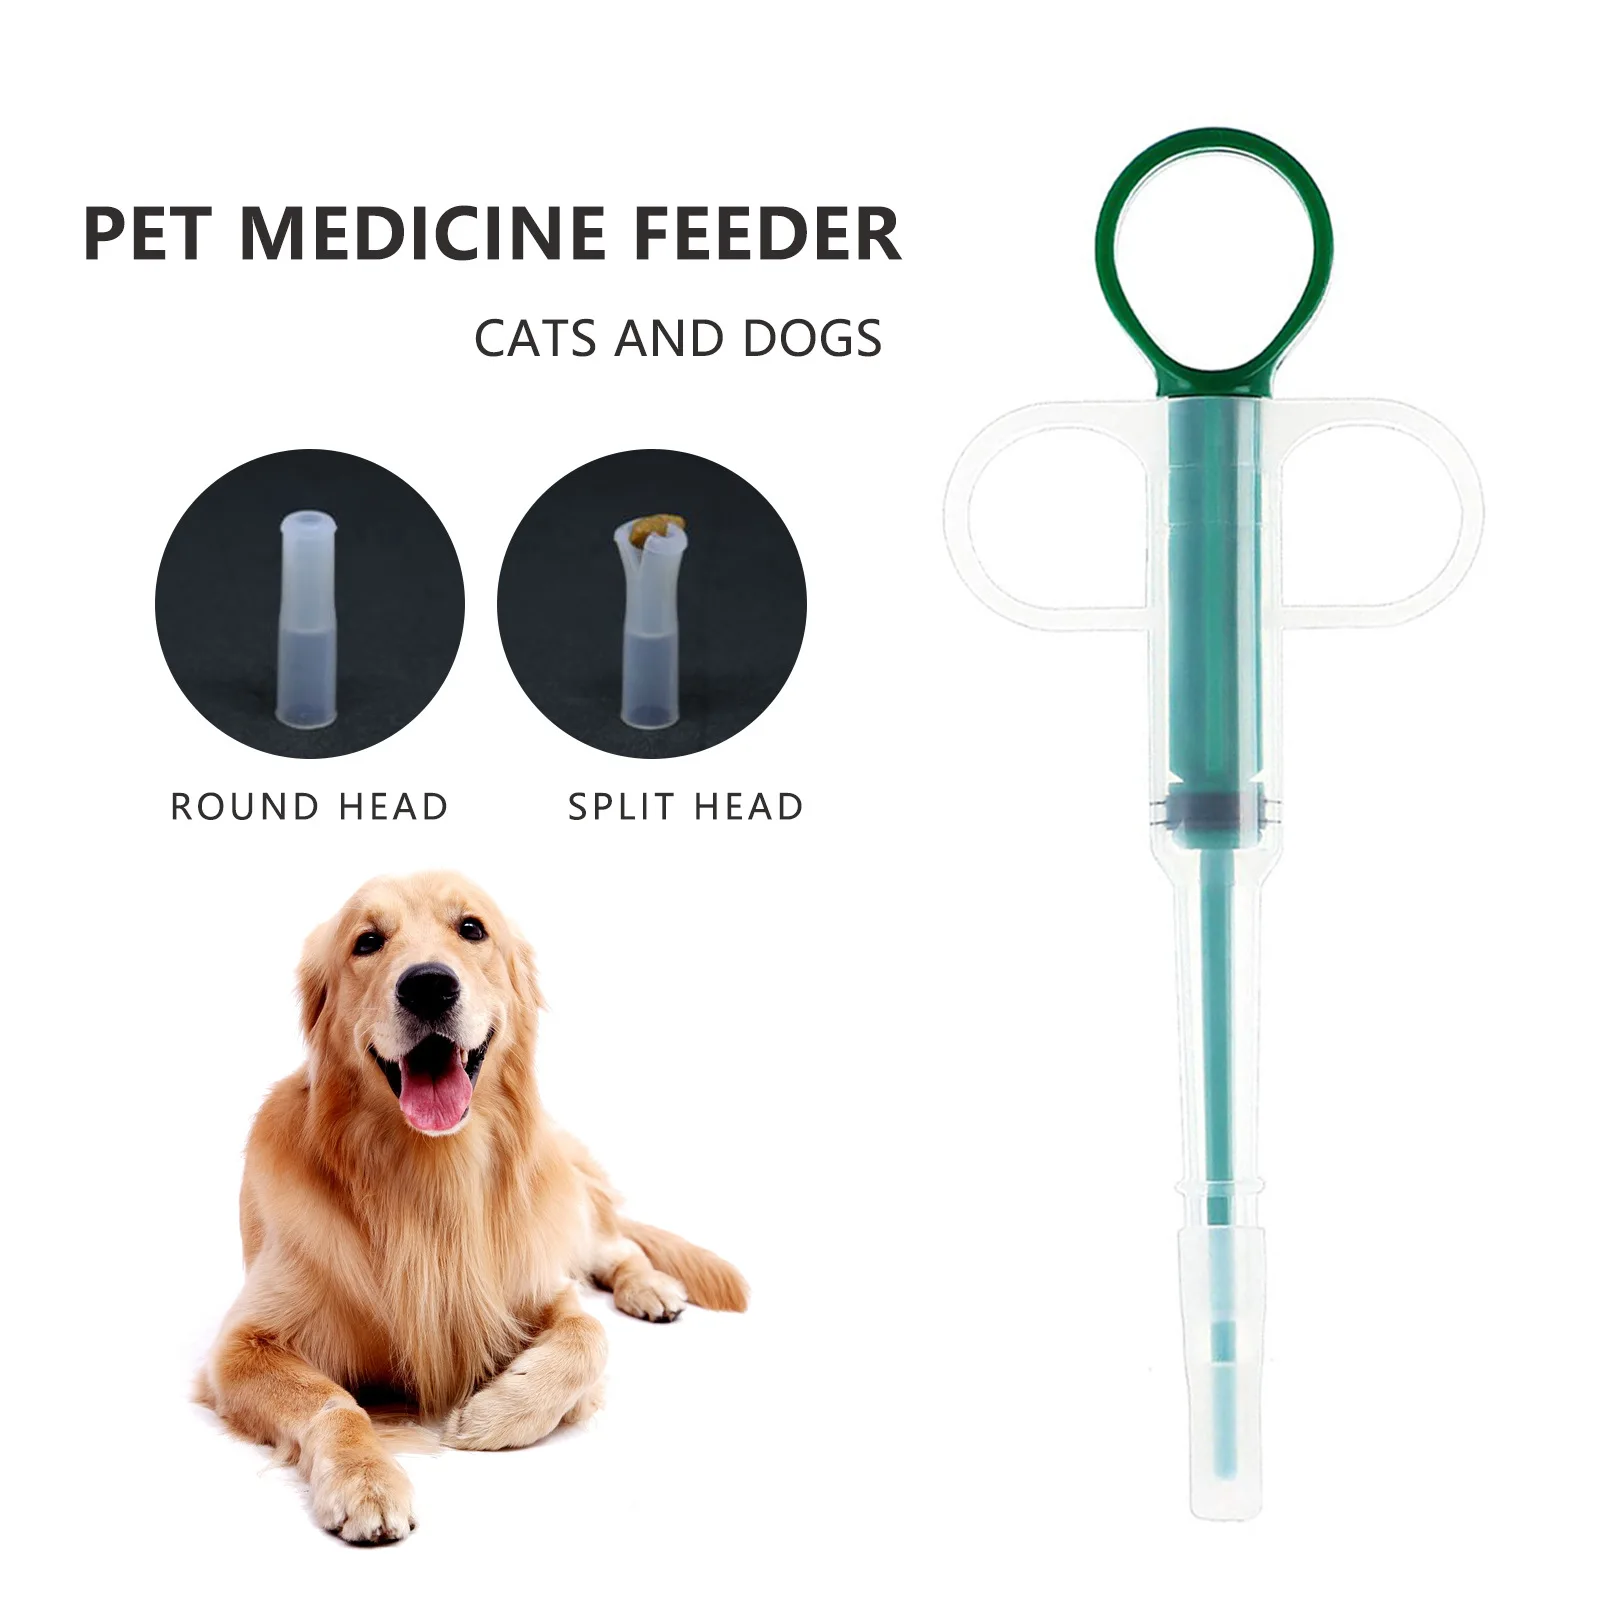 

1pc Pet Cat Dog Feeder Medicine Dispenser Pills Capsule Tablet Pusher Feeding Injection Needle Container Supplies